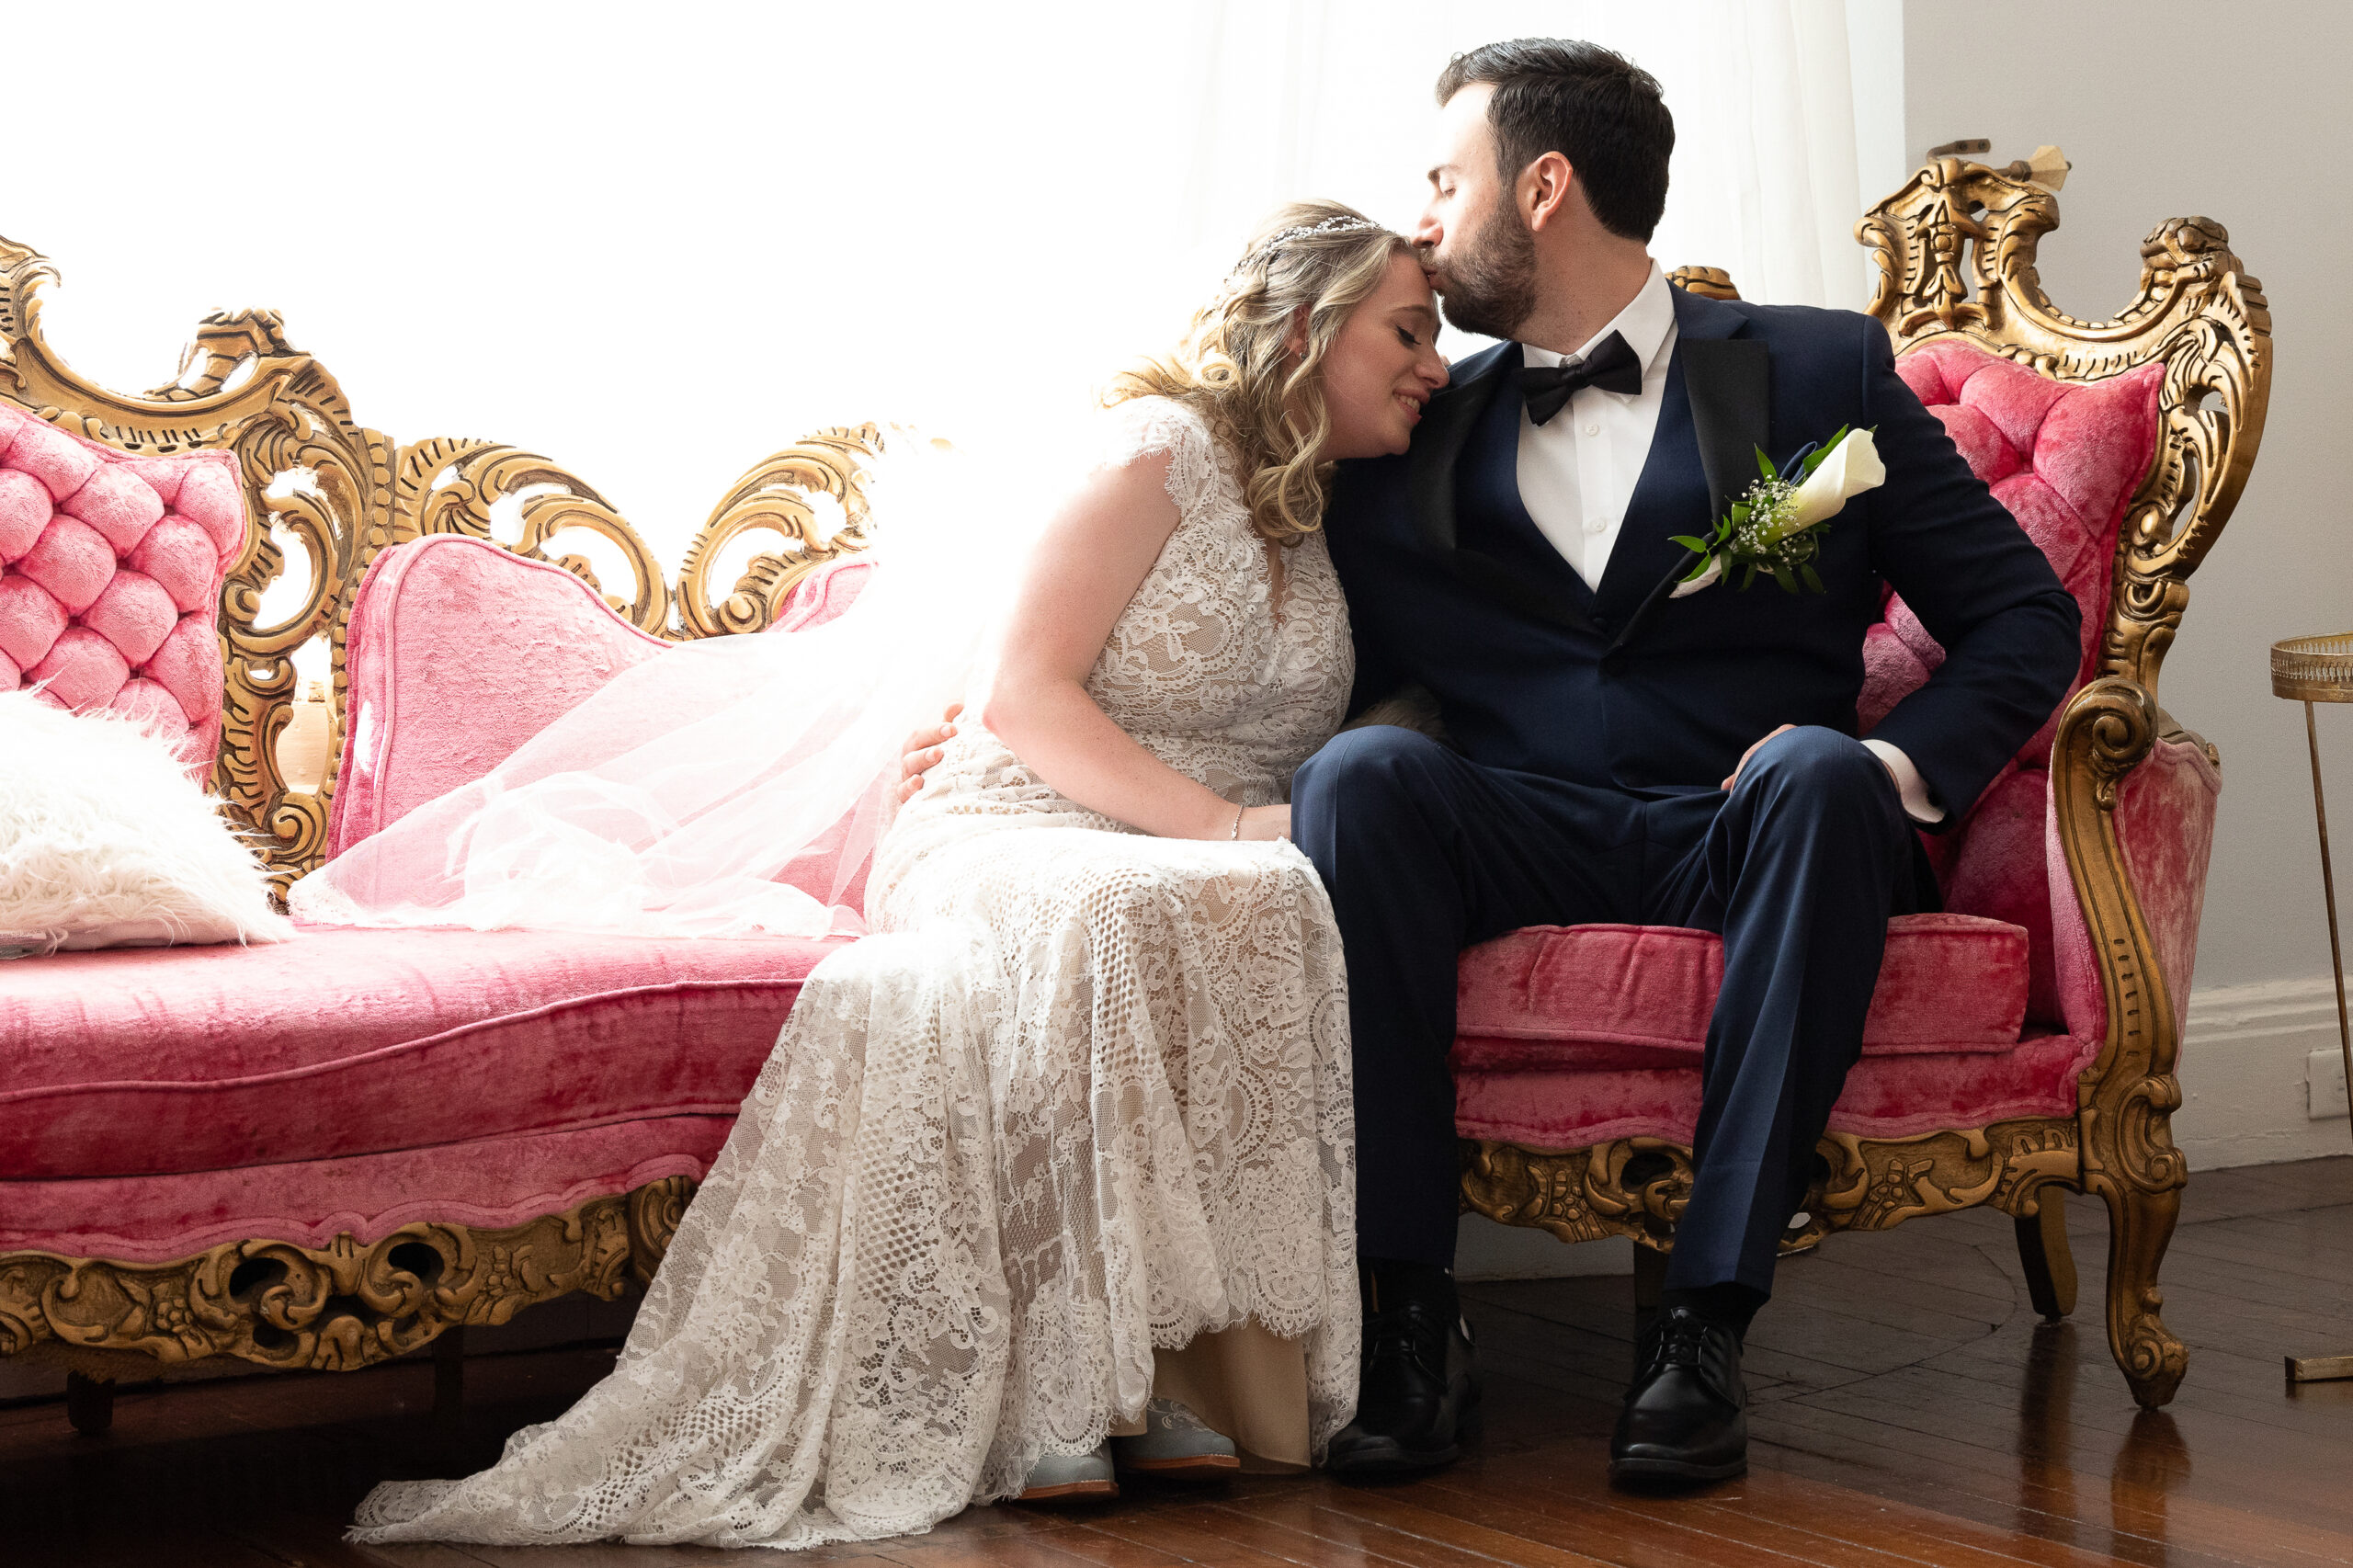 Pink couch photos at the Briarcliff Manor with bride and groom on it.